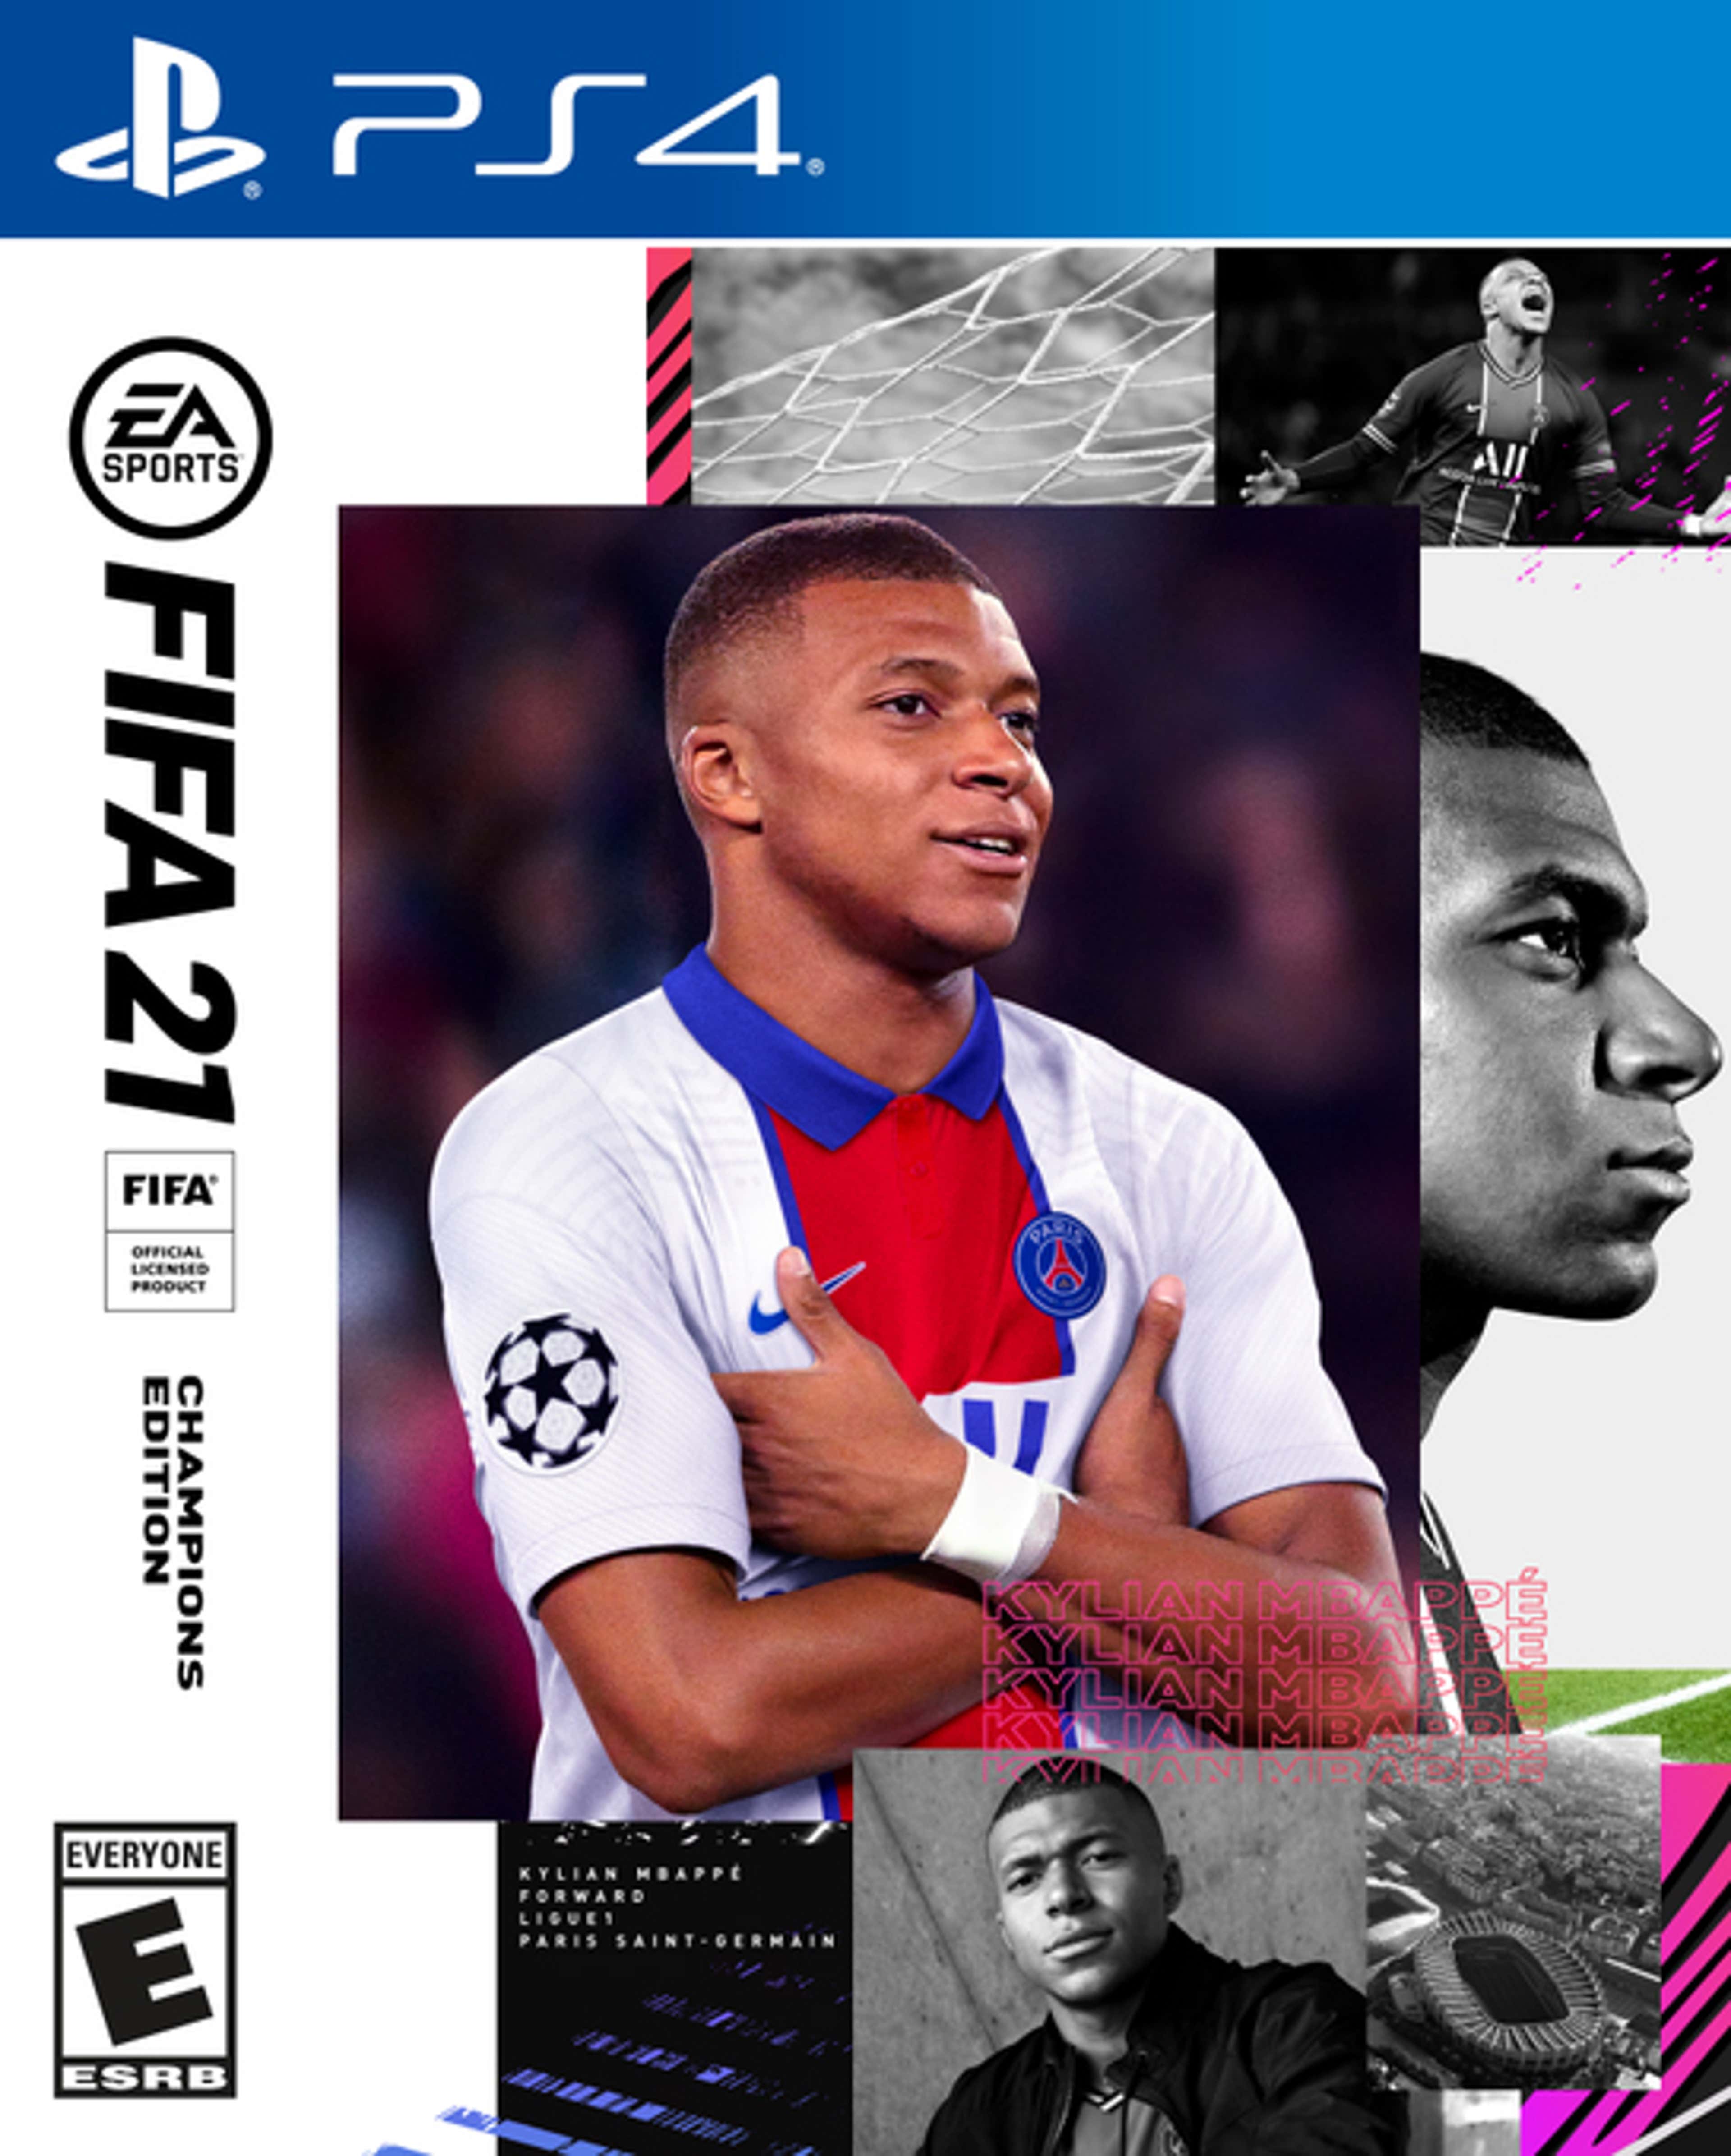 EMBED ONLY FIFA 21 Champions cover Kylian Mbappe